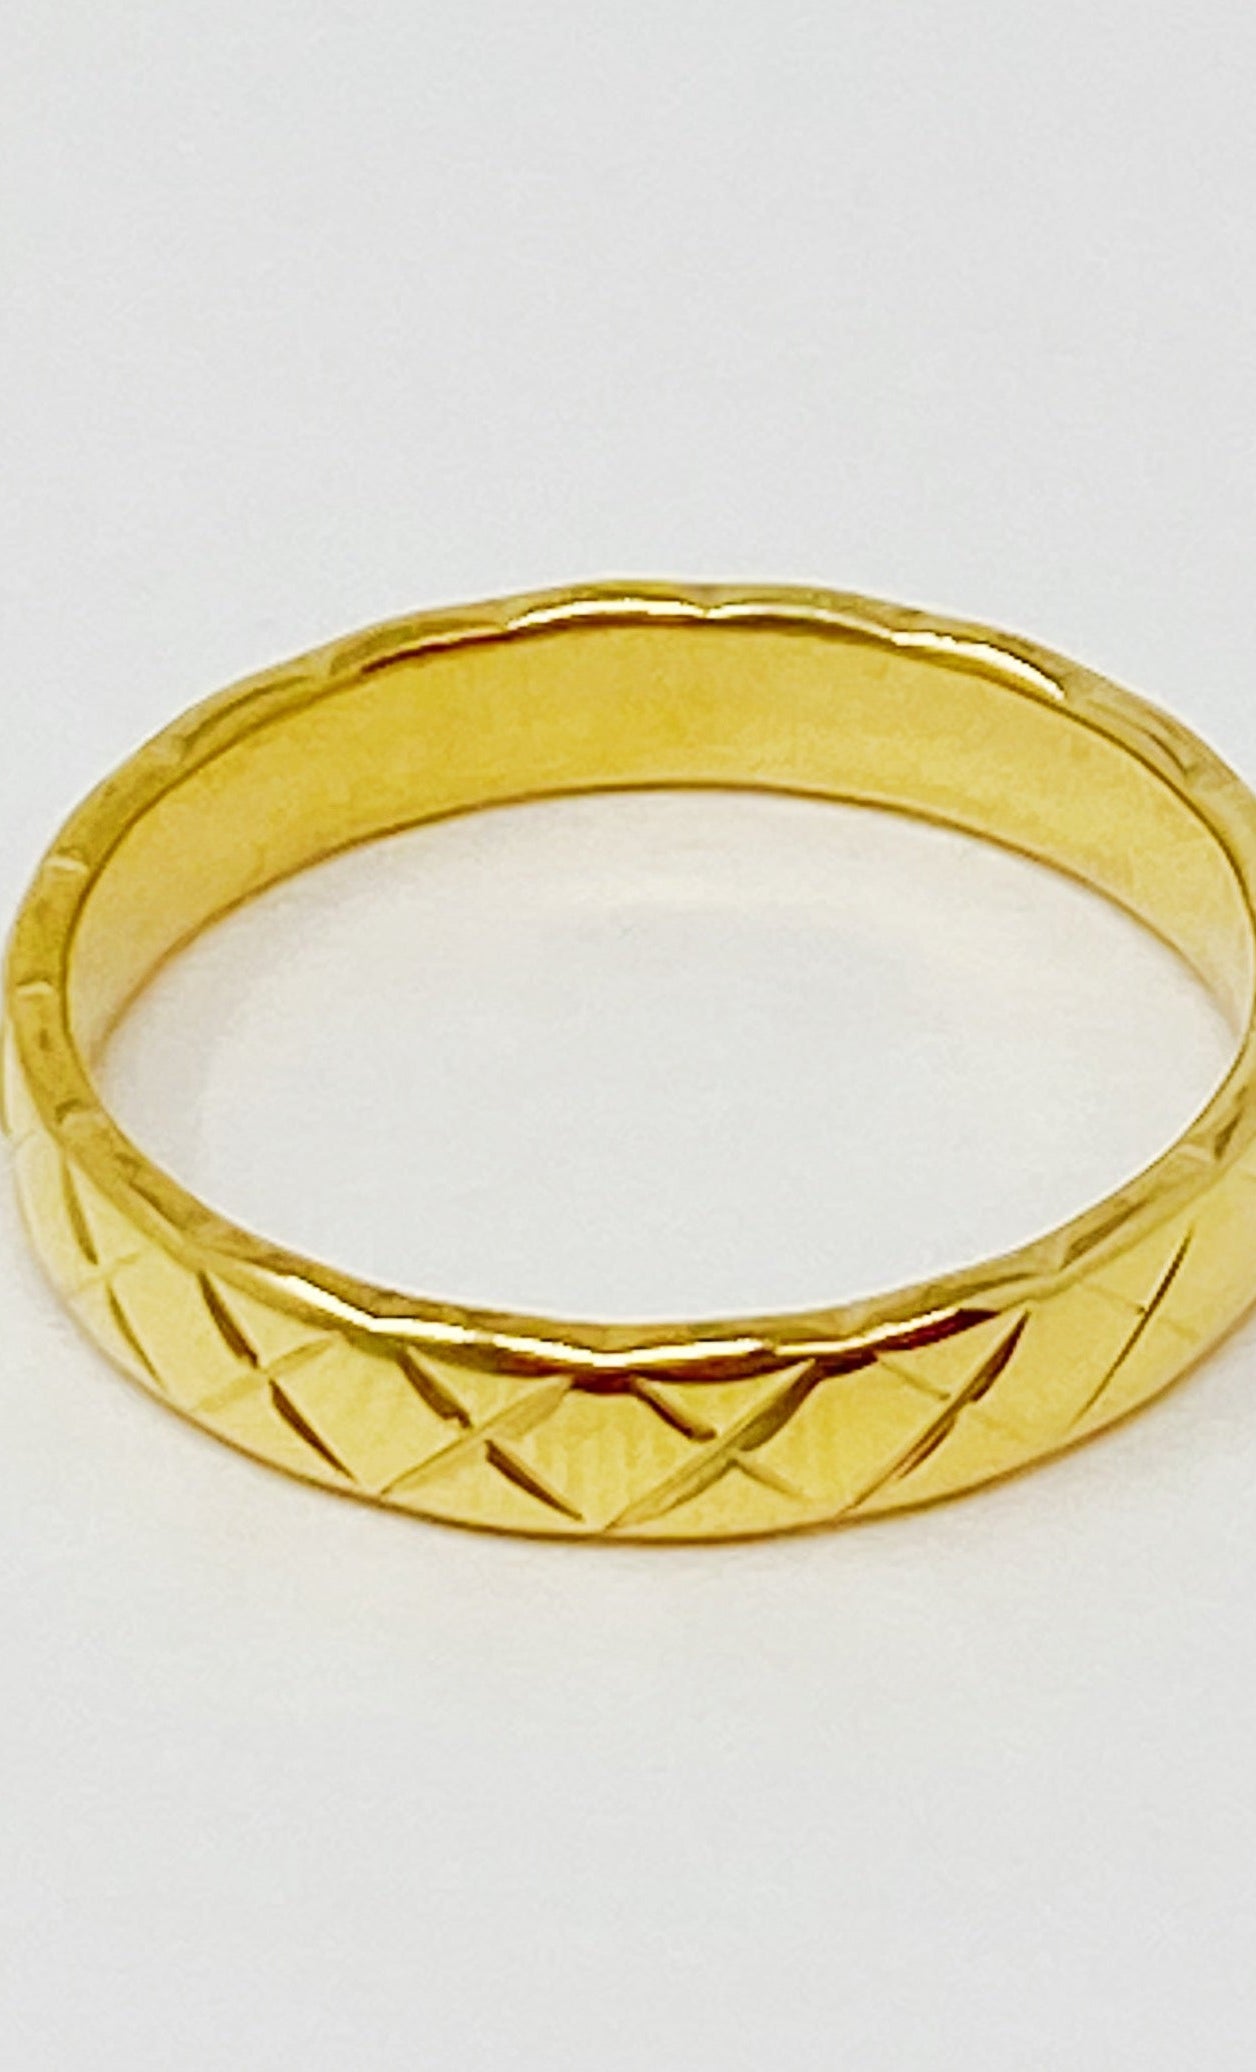 Gold Quilted Ring Ellisonyoung.com